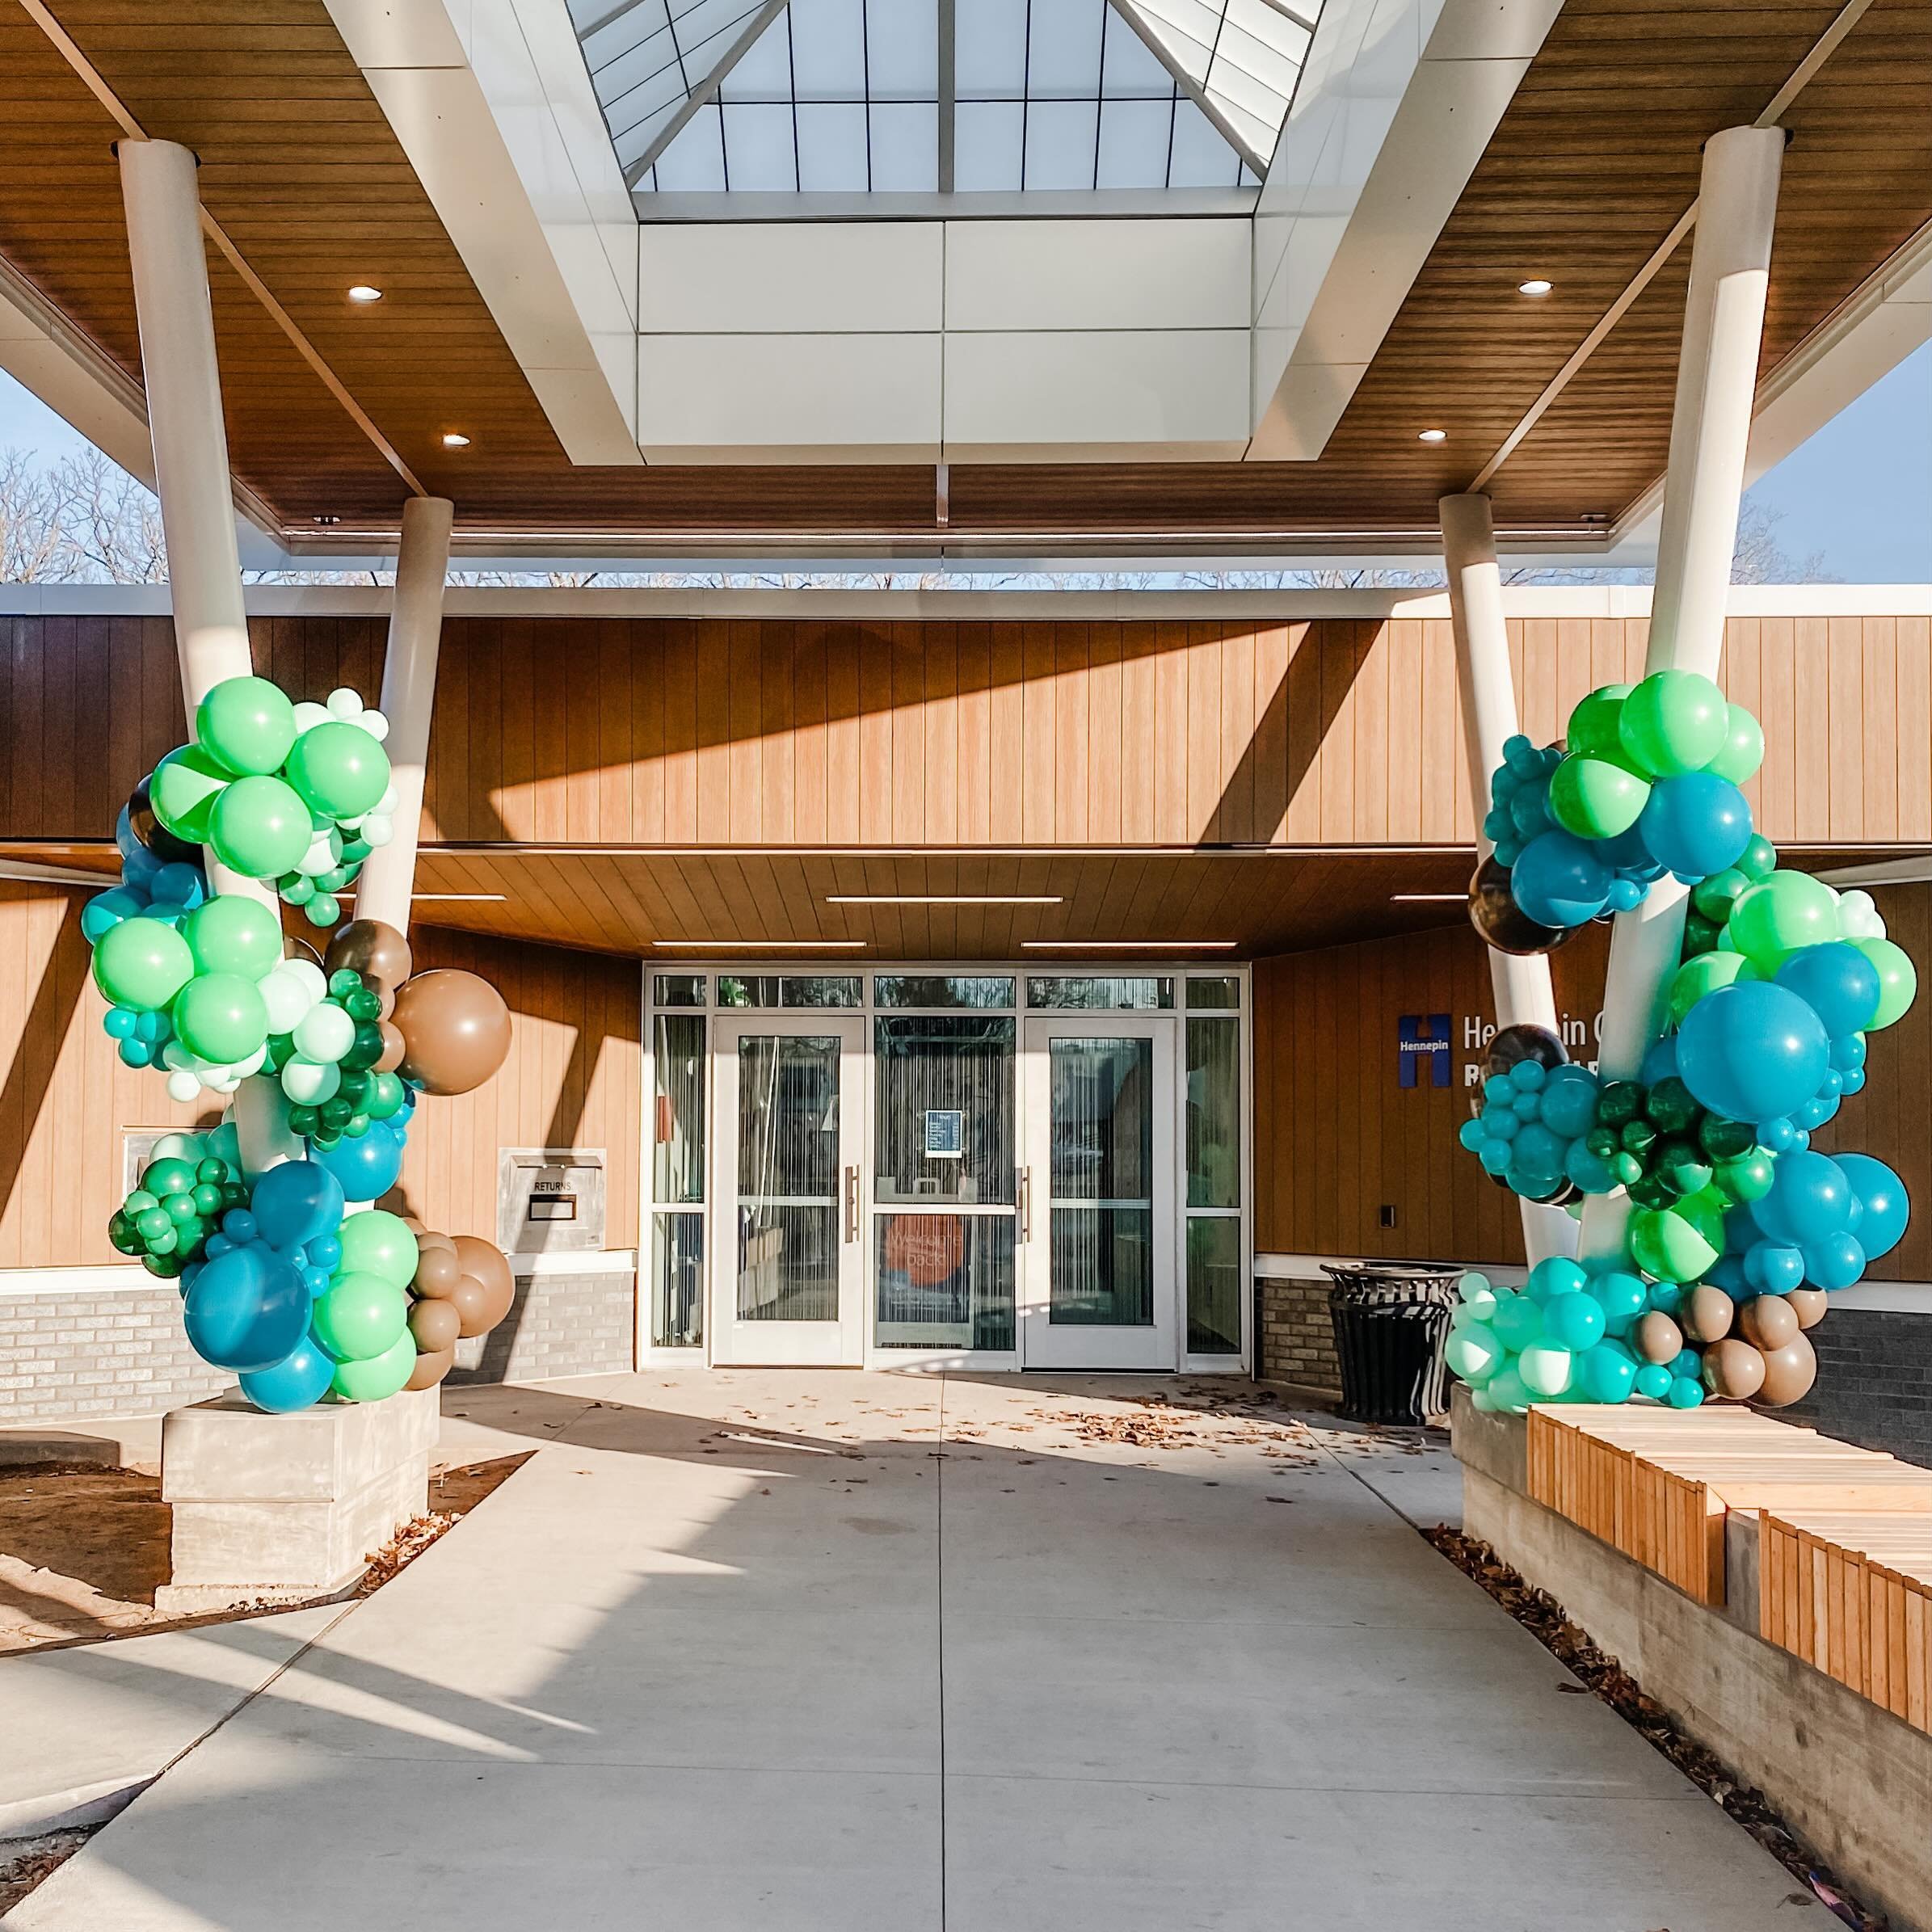 Library grand openings are the best. Thank you @hclib for letting us help you celebrate! 📖 🌎 

#balloondecor #grandopeningballoons #librarygrandopening #twincitiesballoonstylist #twincitiesballoondecor #minneapolisballoons #minneapolisballoonstylis